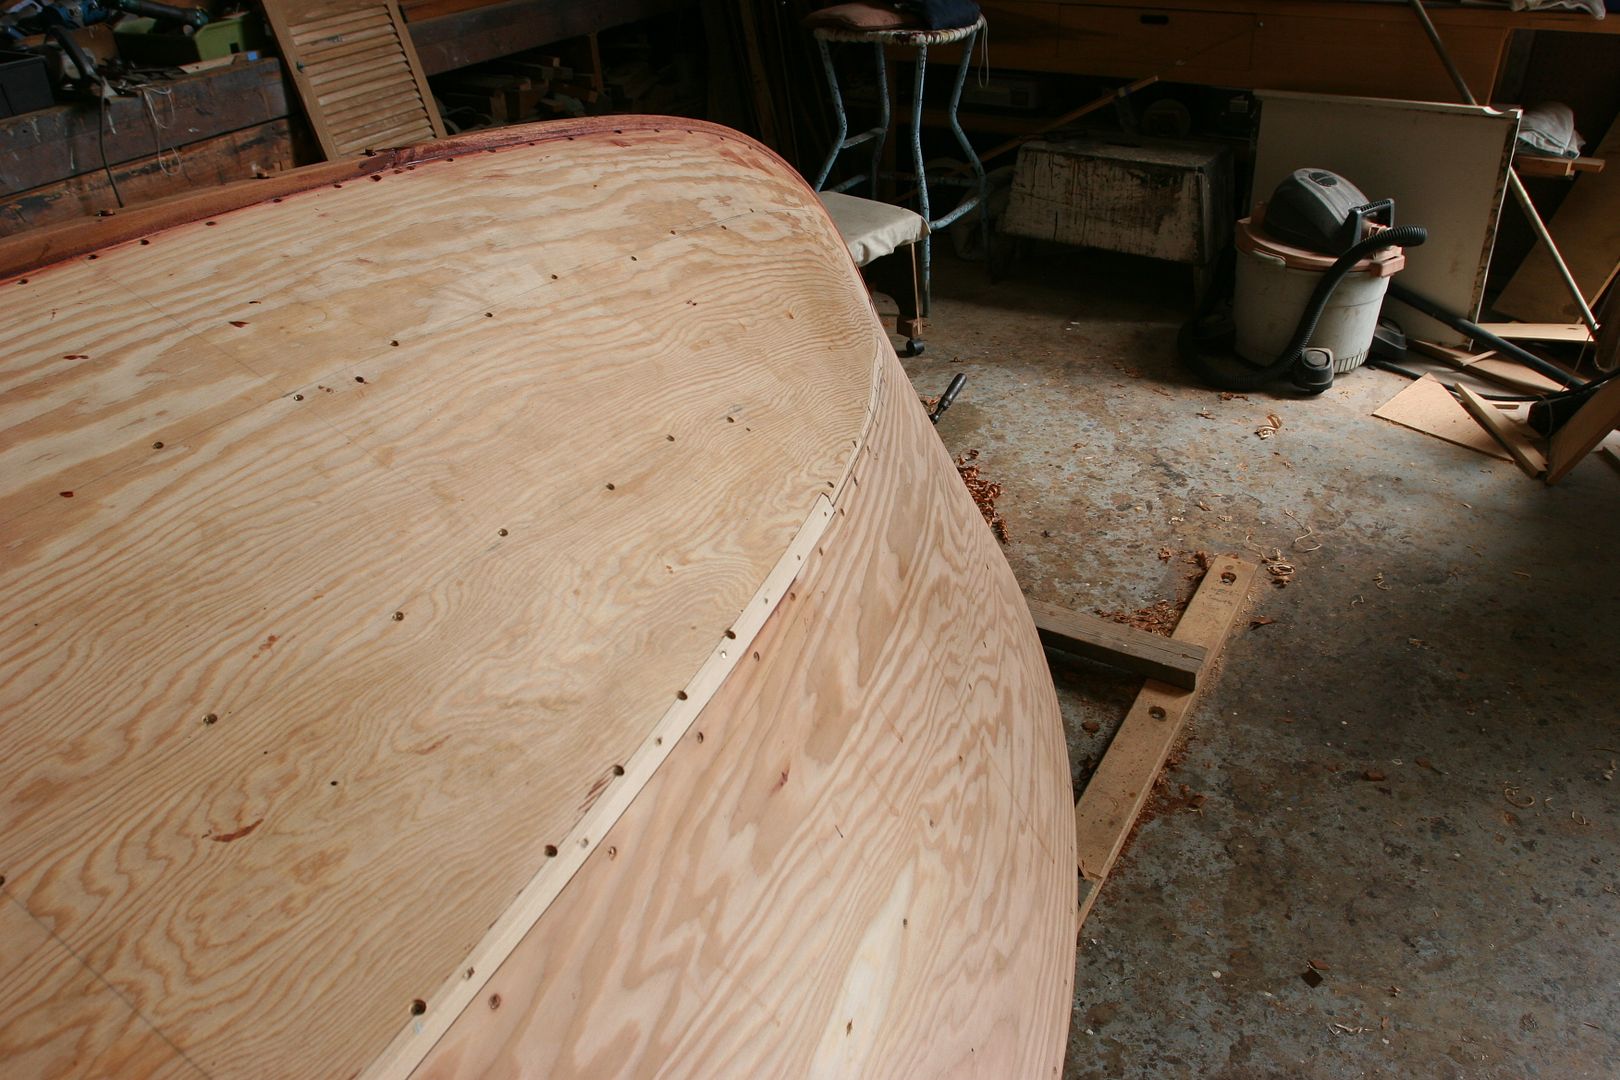 Re: Building a Luzier 16' Outboard Skiff, designed by George Luzier 